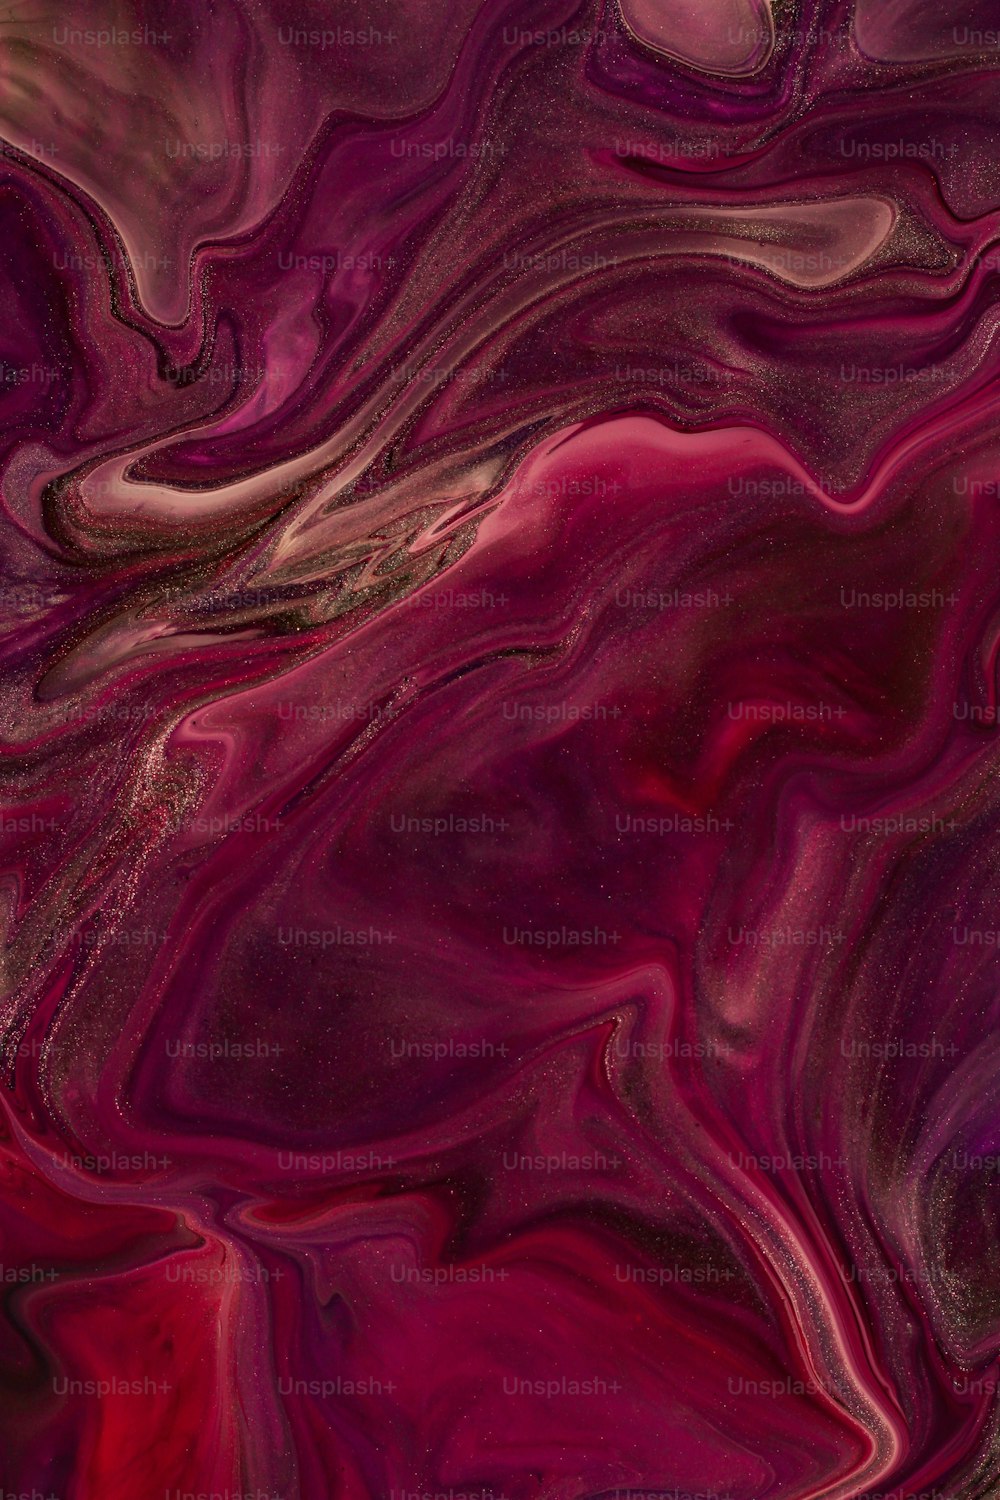 a very pretty purple and red background with lots of colors